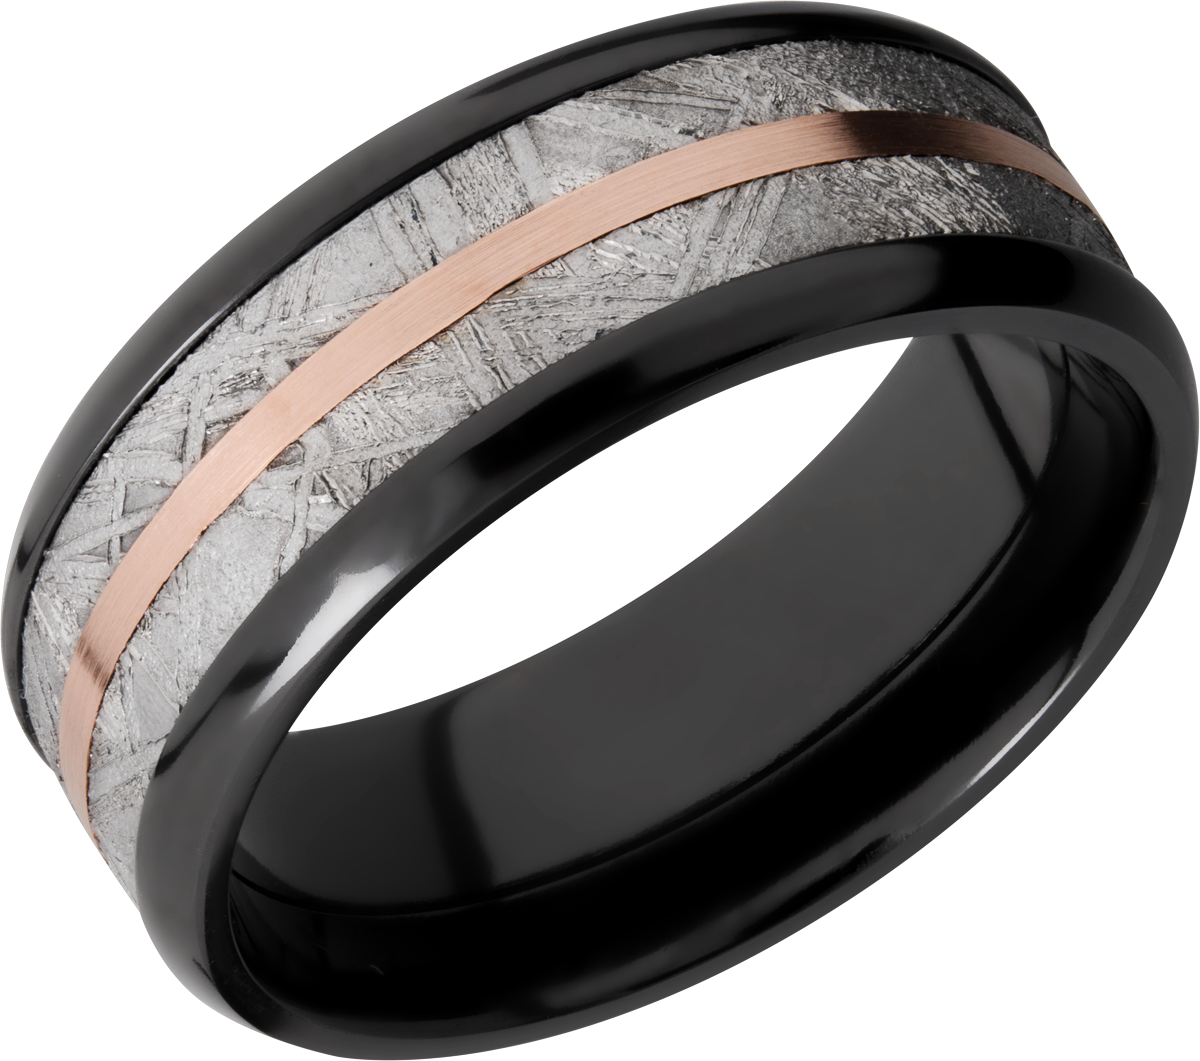 Black zirconium 8mm beveled edge band with one inlay that is 5mm wide of hardwood. (NS)= no step PO